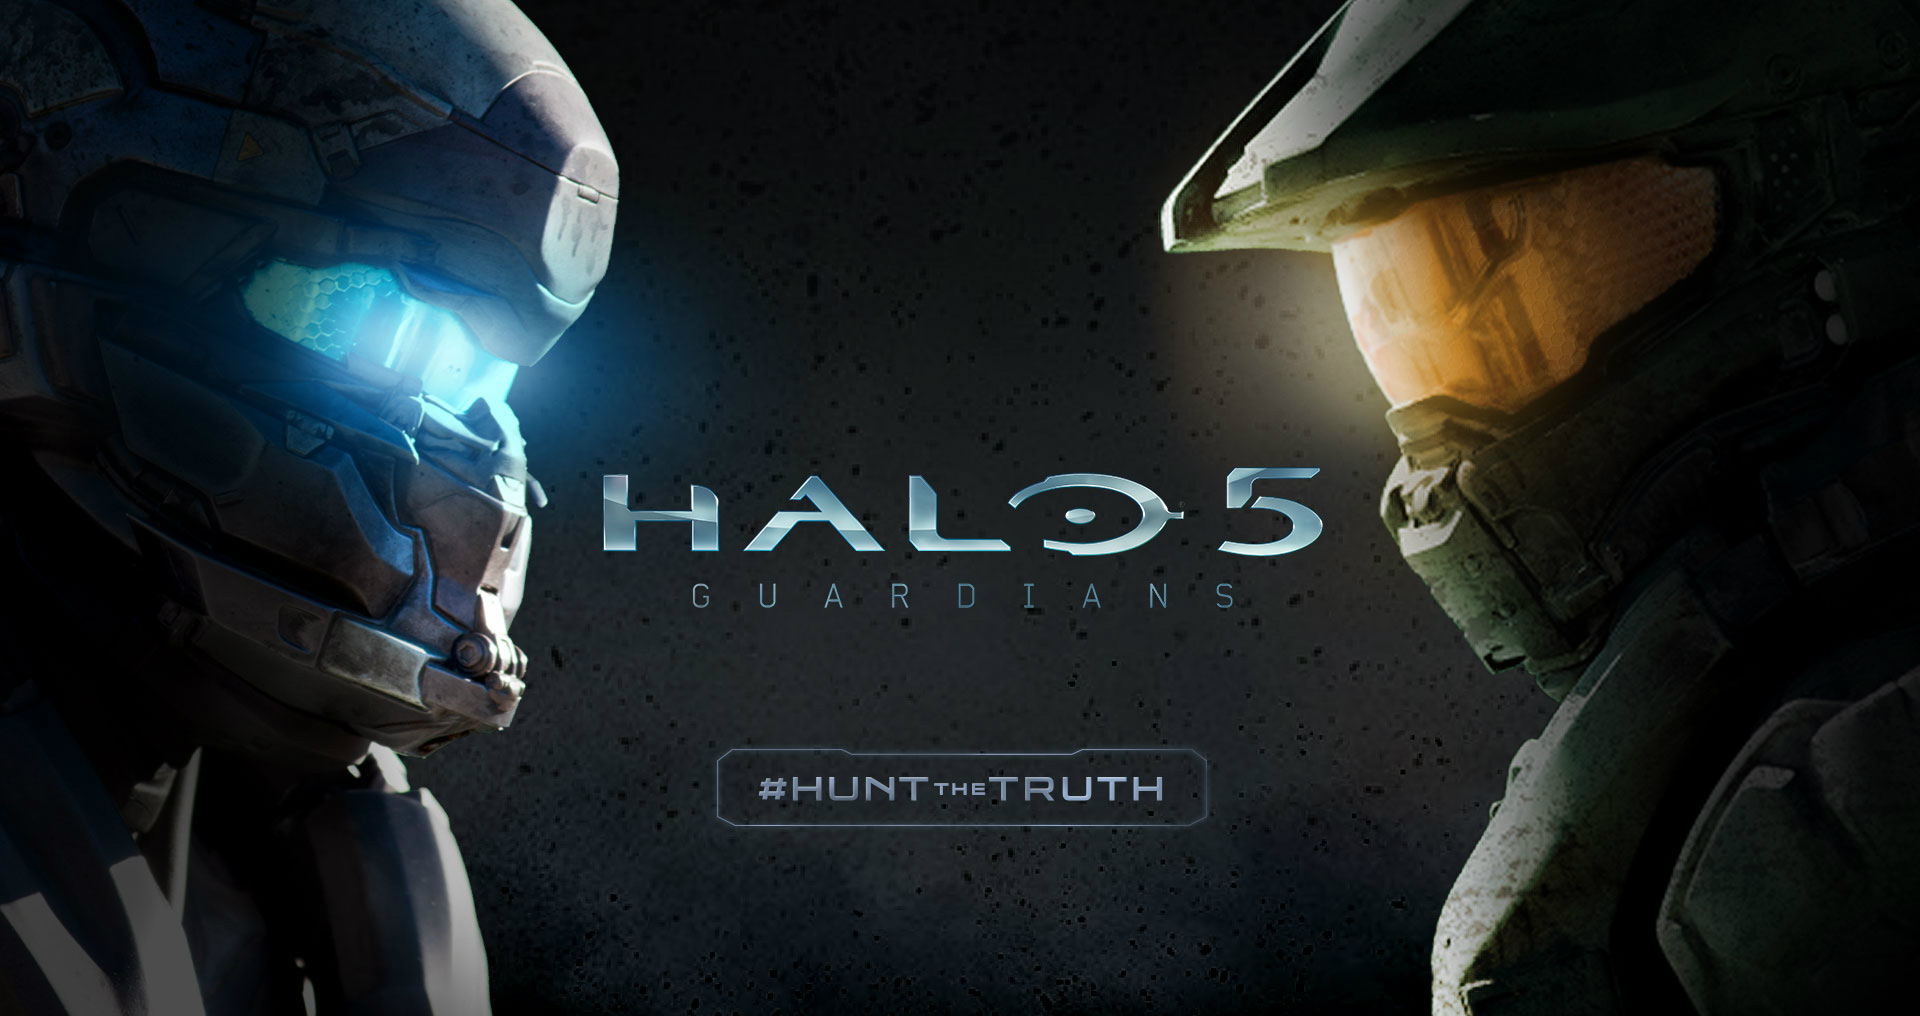 Halo Guardians Image Leaked Hints At Agent Locke Vs Master Chief